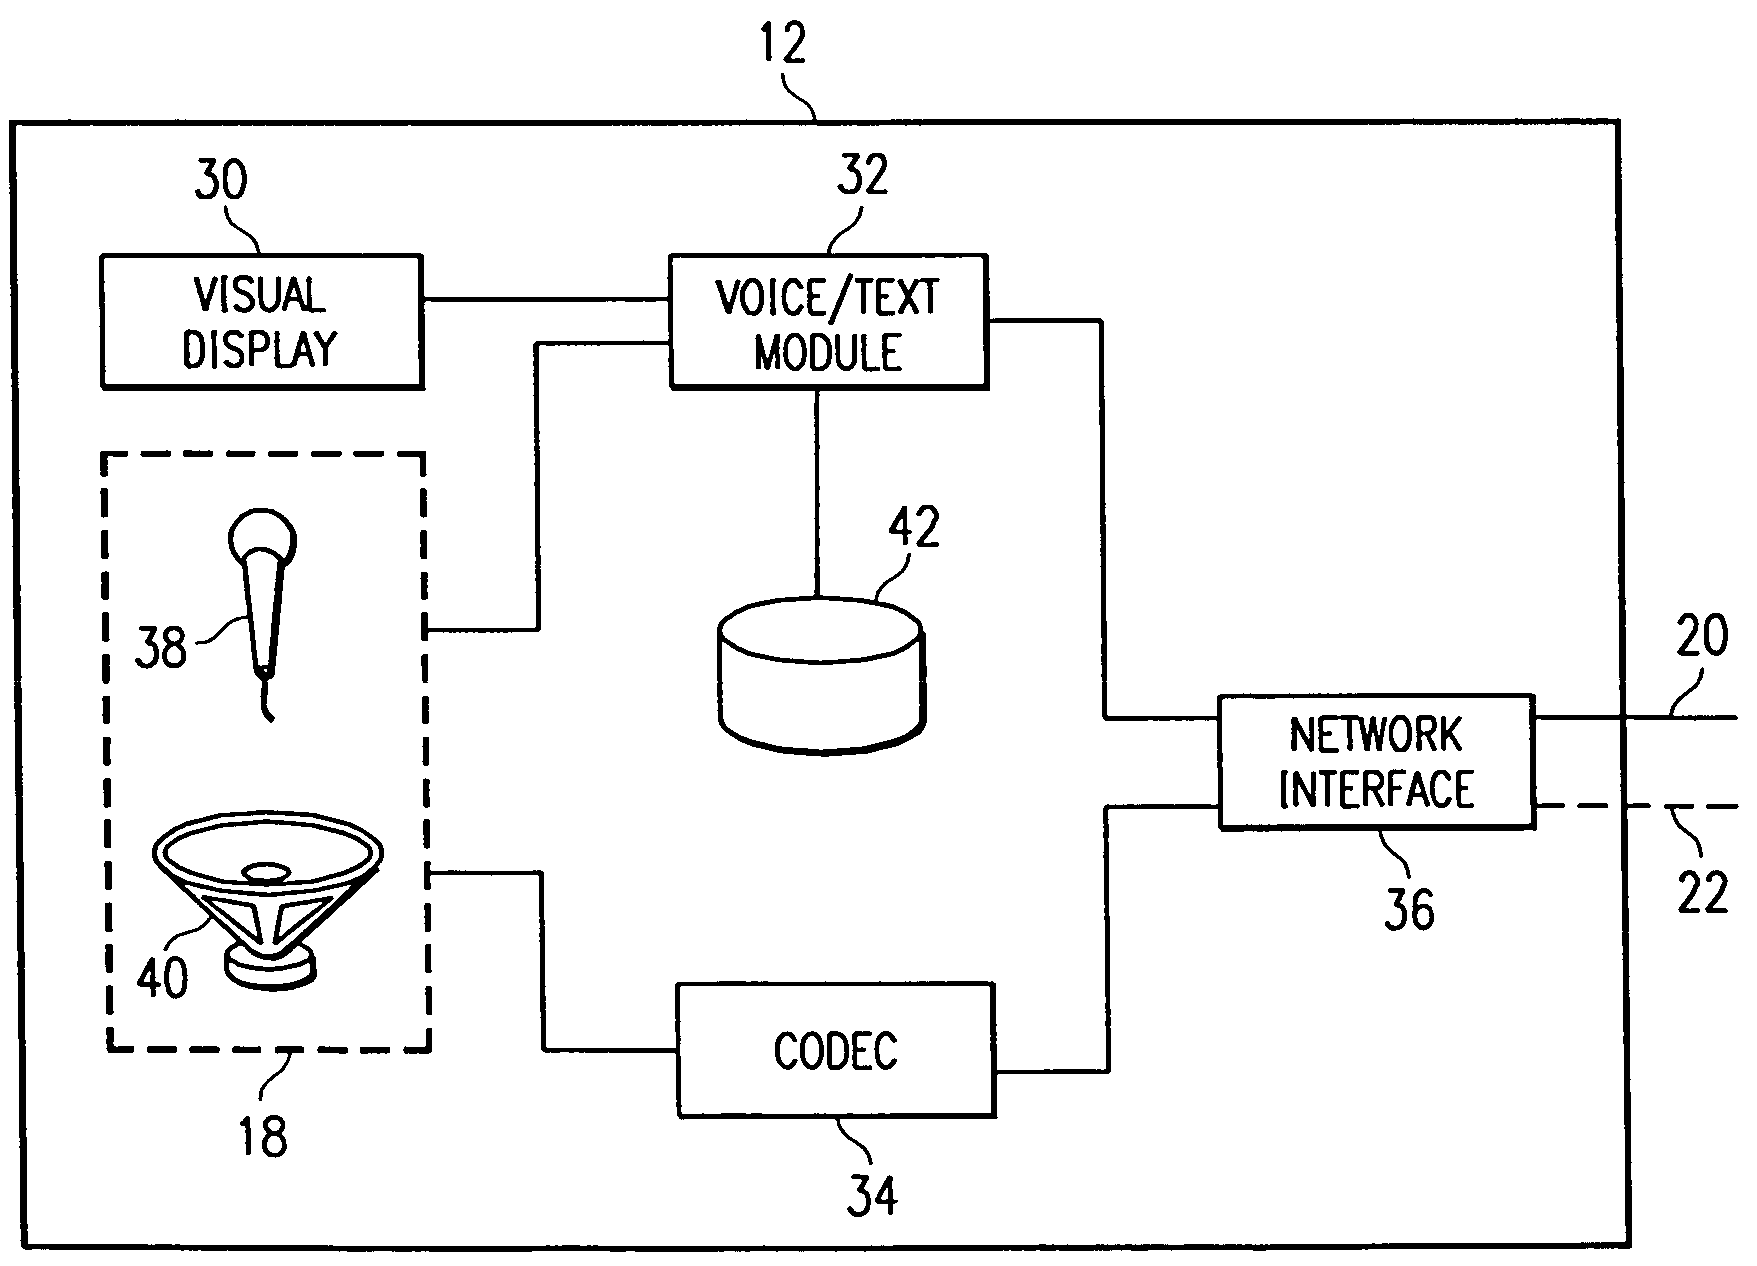 System and method for speech recognition assisted voice communications